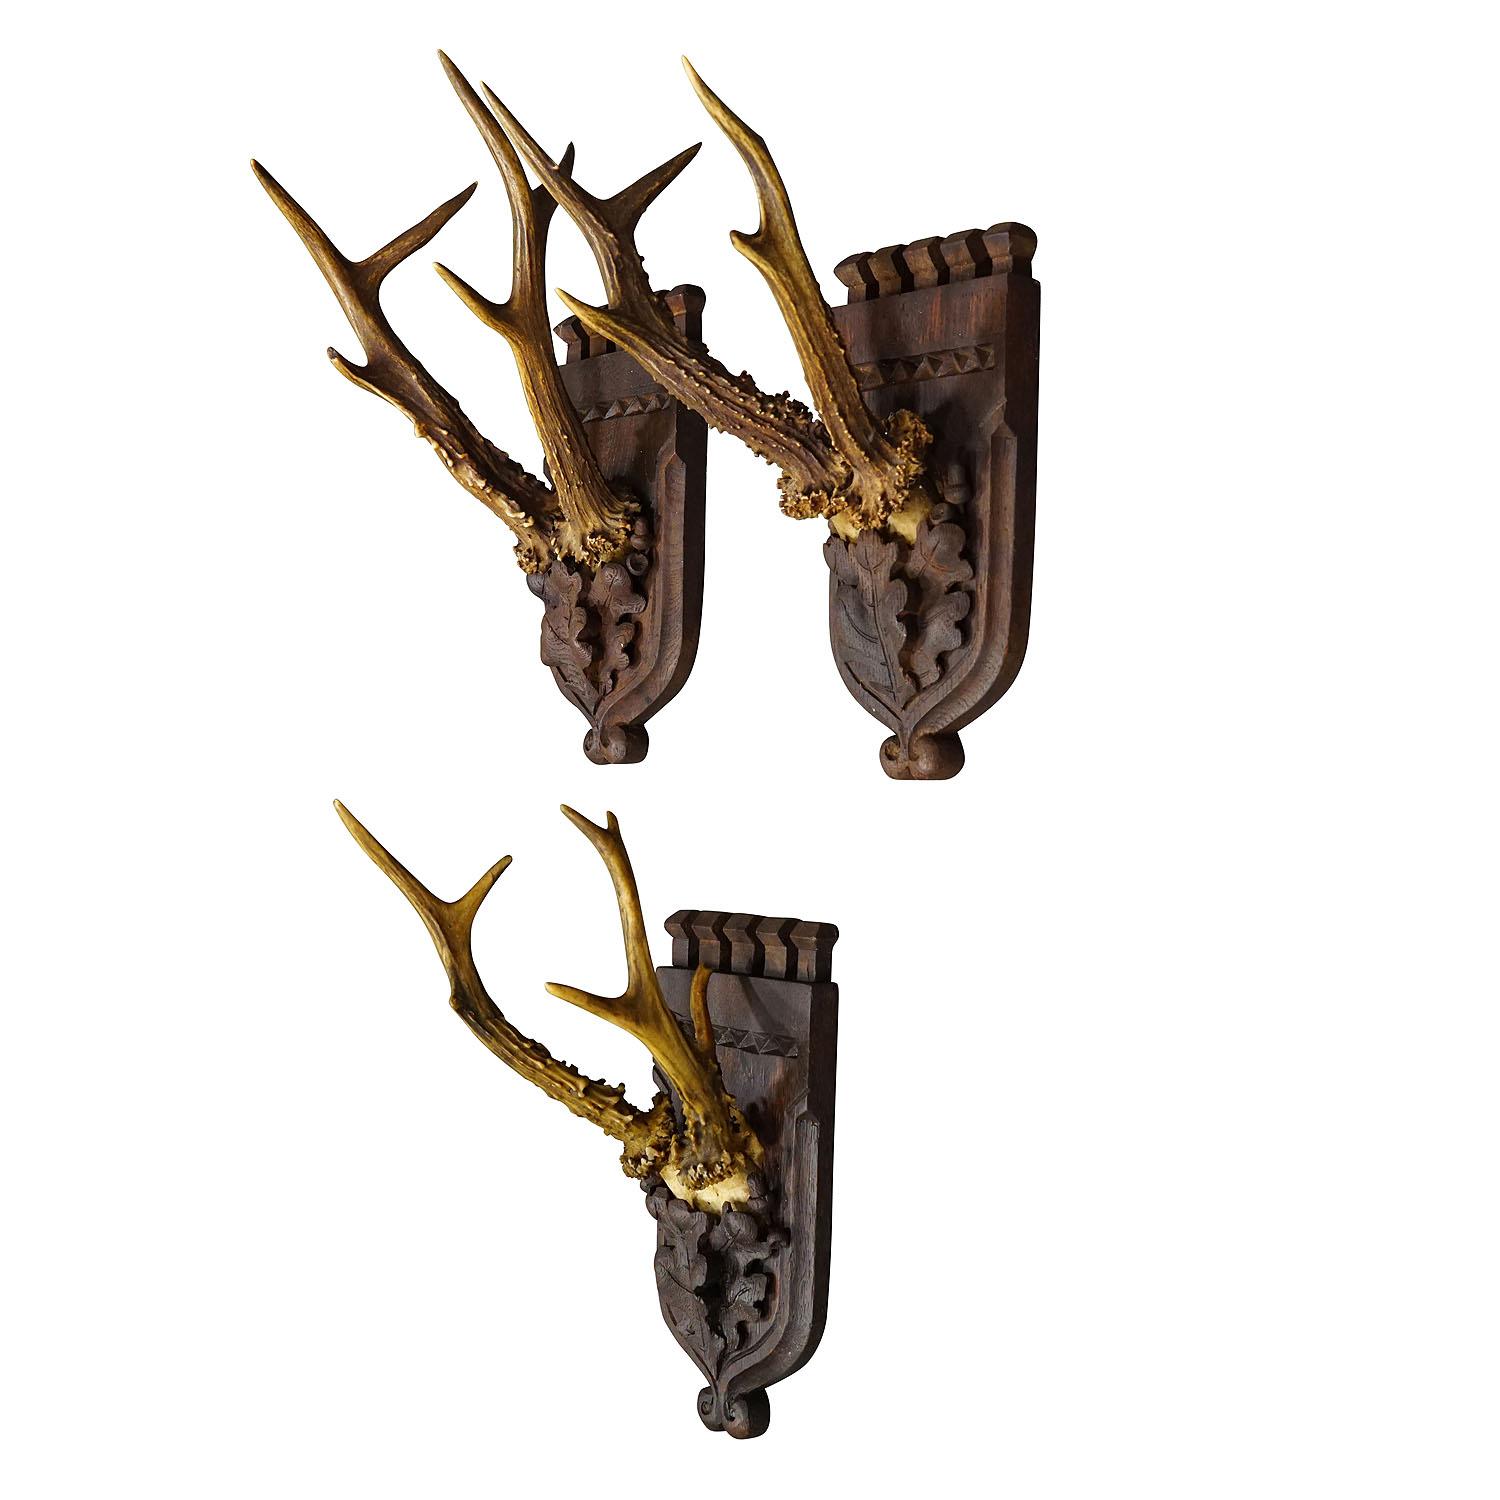 Set of Three Roe Deer Trophies on Carved Oak Wood Plaques

A set of three large Black Forest roe deer (Capreolus capreolus) trophies mounted on carved oak plaques. The trophies were shot in Germany around 1900. The plaques are carved in neo-Gothical